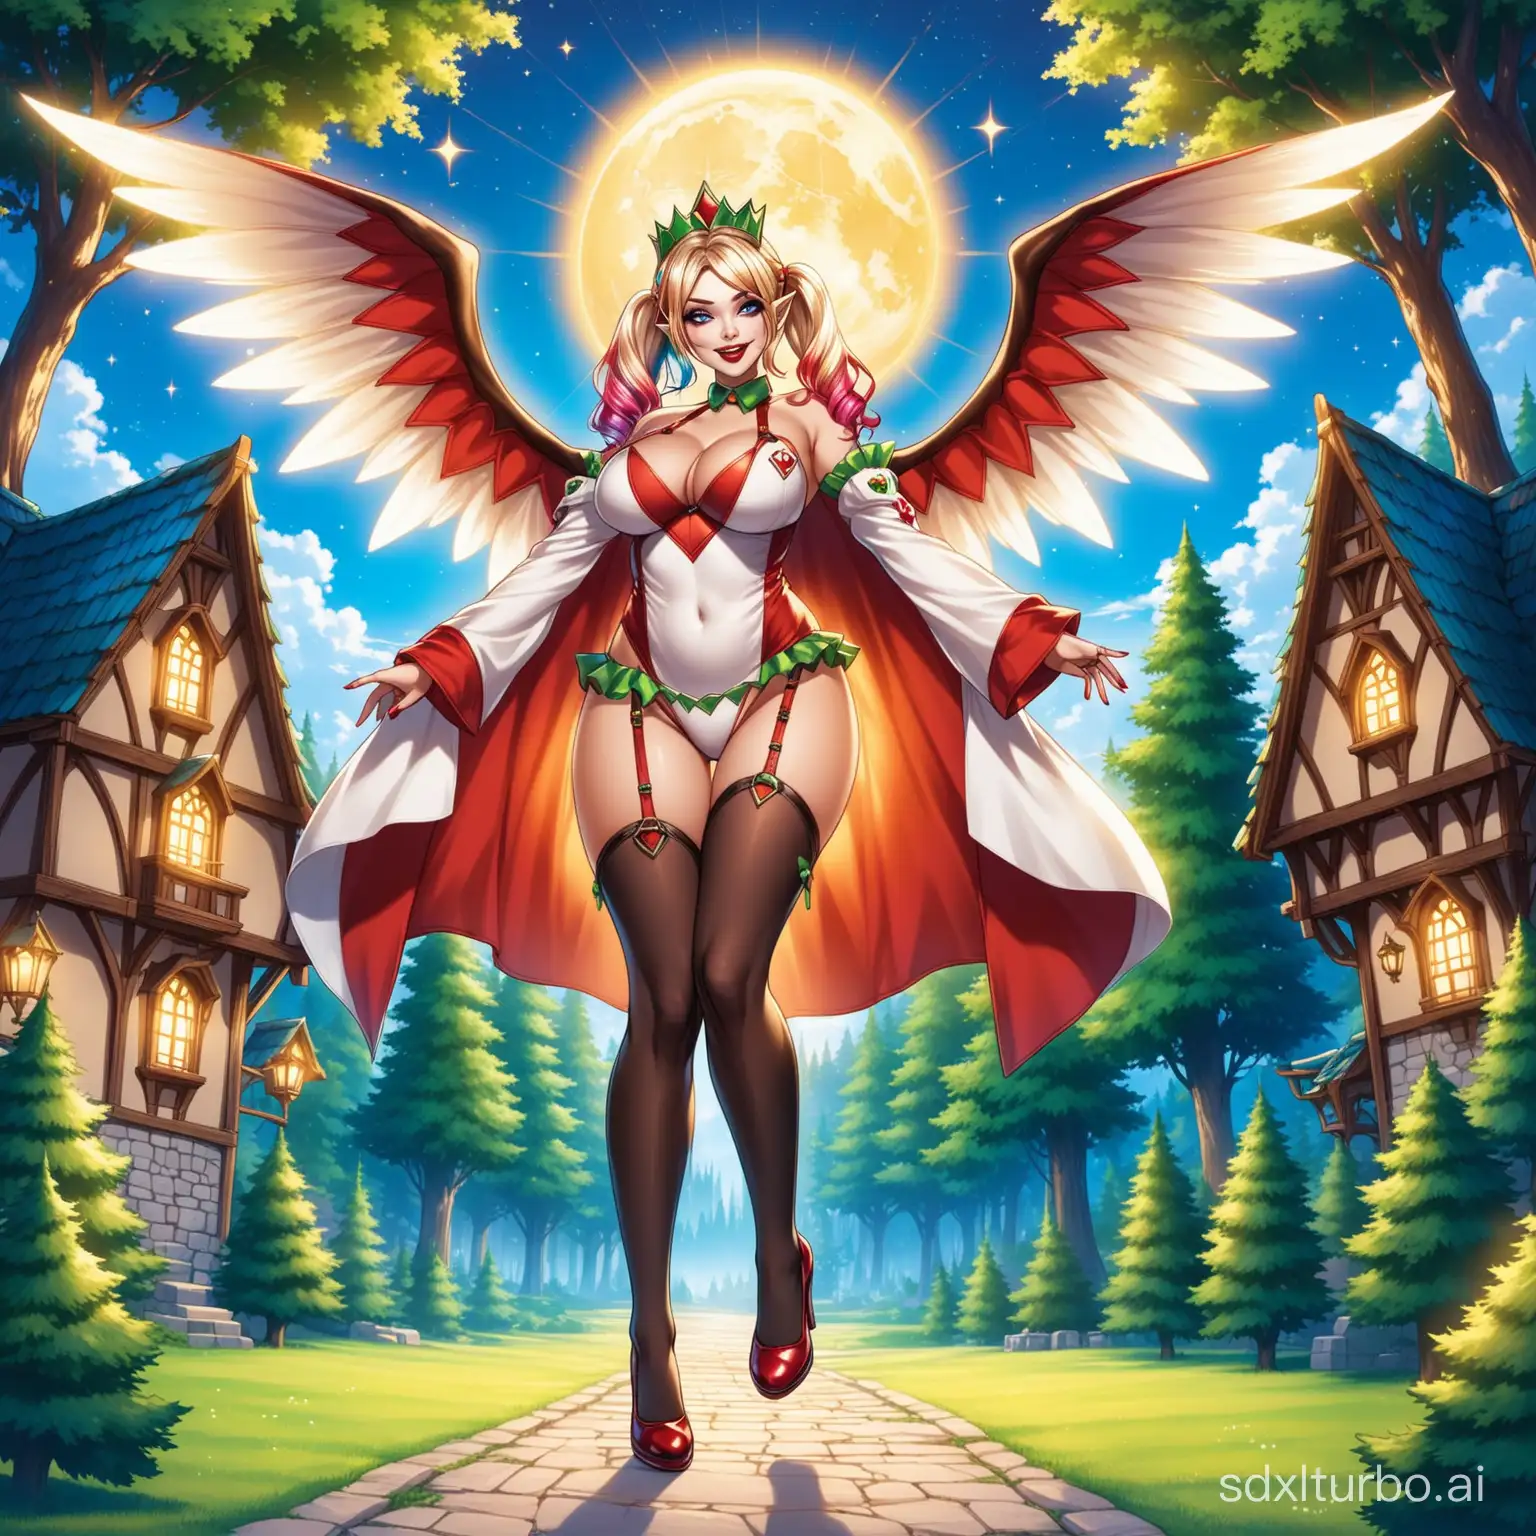 Busty gyaru elf Harley Quinn comes out of a portal to another world putting her right leg forward,white magic robe,deep neckline, underboob,stockings with garters,shoes with wings,a shining tiara,around the elven kingdom,behind are houses on tall trees,sunny sky,there are two suns and two moons in the sky,style raw,real photograph,perfect body,prfessional shot,different angle.